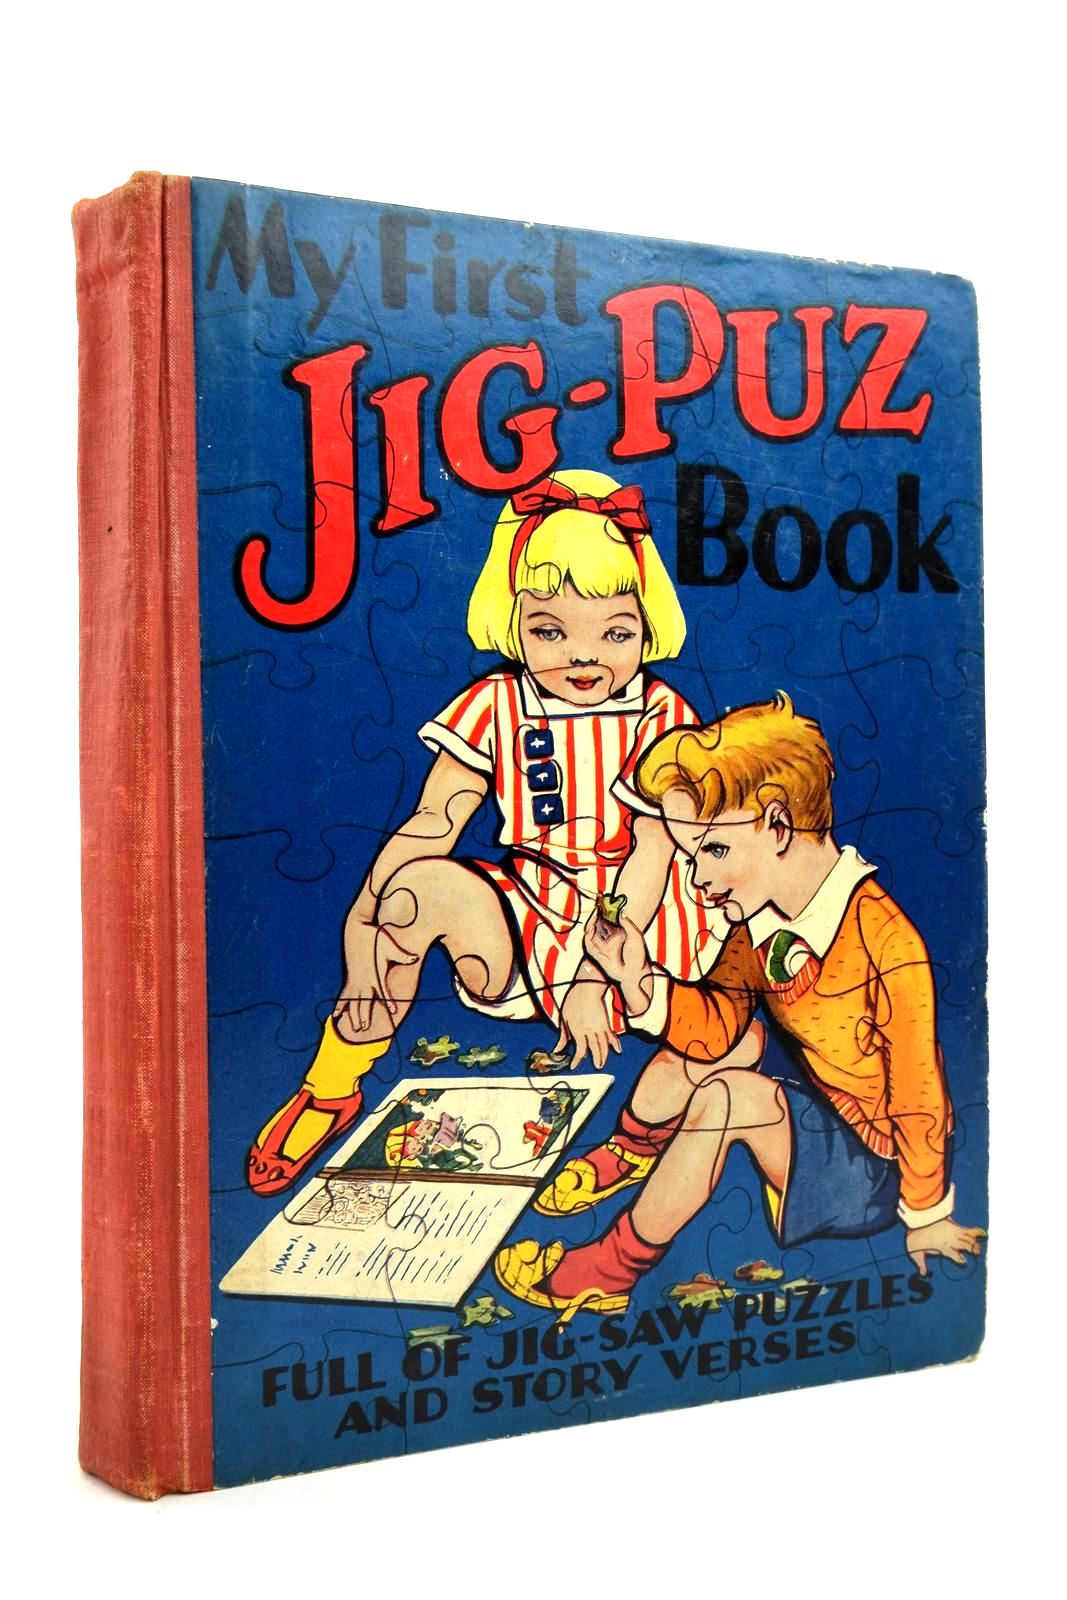 Photo of MY FIRST JIG-PUZ BOOK published by John Leng & Co. Ltd. (STOCK CODE: 2140072)  for sale by Stella & Rose's Books